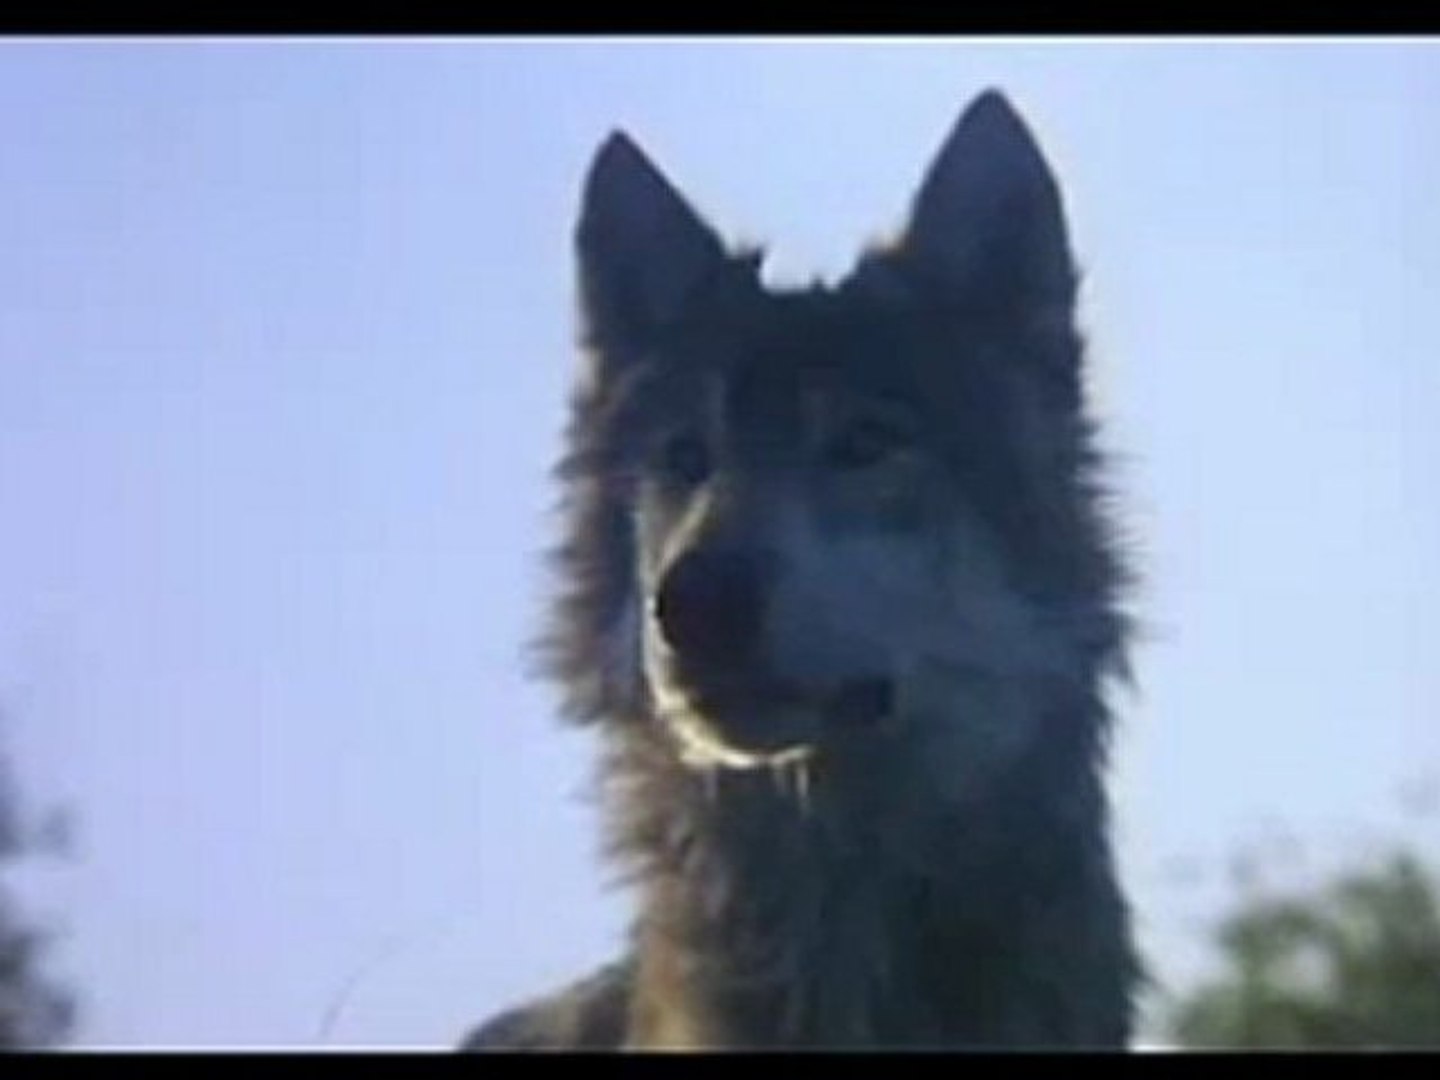 Dances with wolfs-Farewell & end title by John Barry - Vidéo Dailymotion